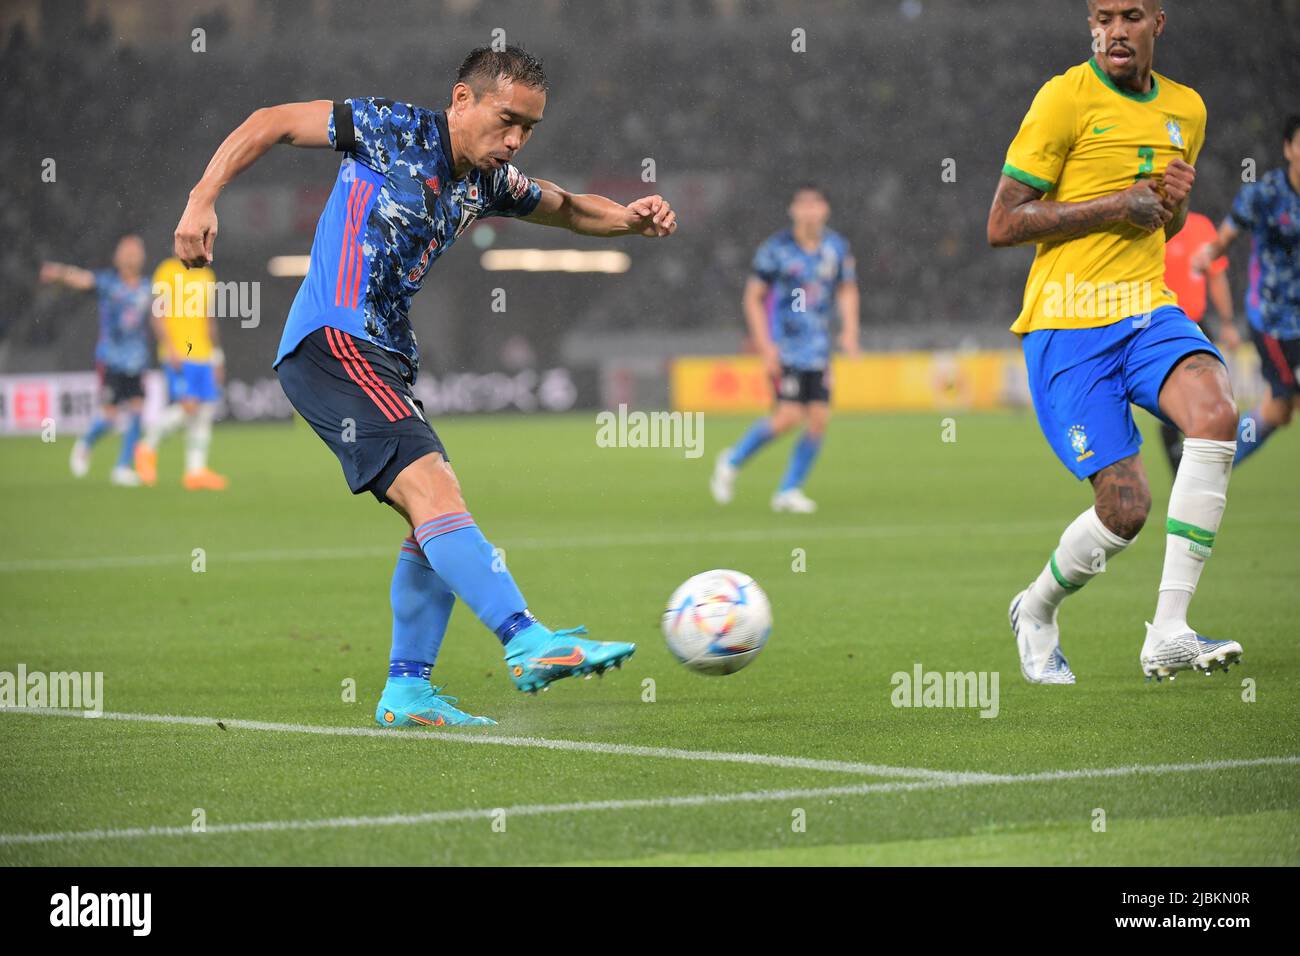 Tokyo, Japan. 6th June, 2022. Yuto Nagatomo (5) of Japan and Eder Militao (2) of Brazil during the Kirin Challenge Cup international friendly soccer match between Japan and Brazil at National Stadium in Tokyo, Japan, June 6, 2022. Credit: FAR EAST PRESS/AFLO/Alamy Live News Stock Photo